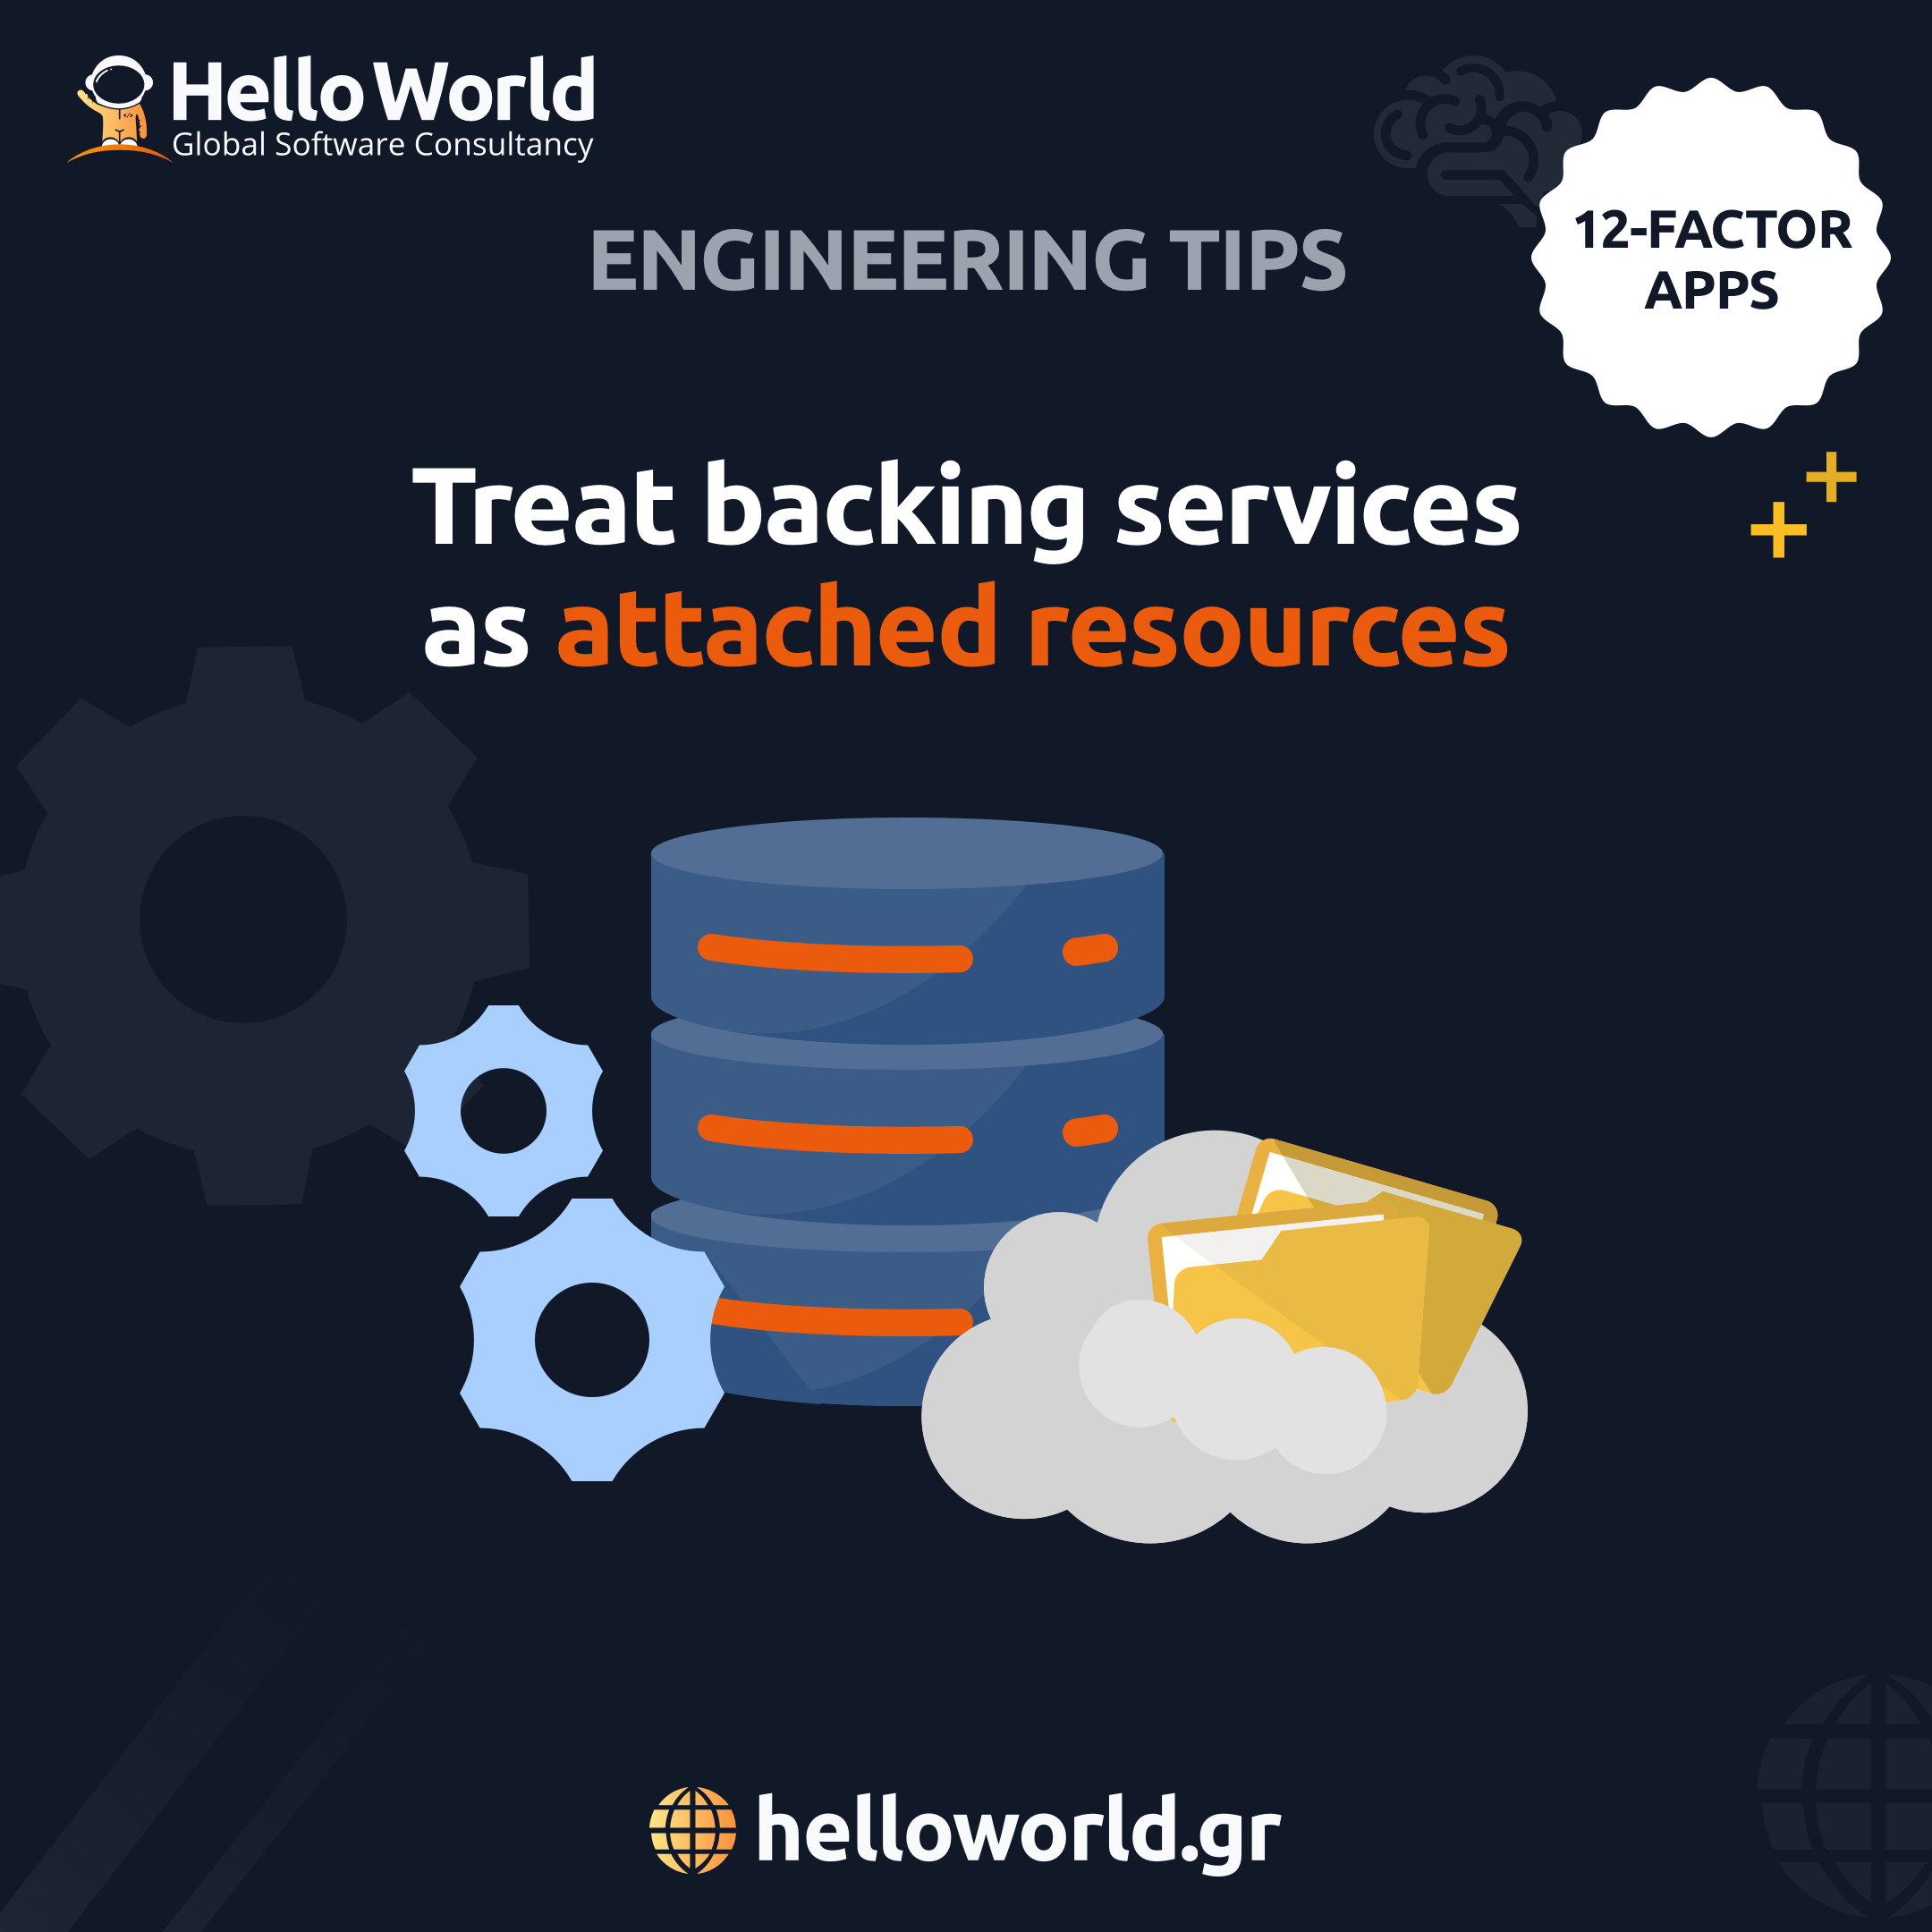 Backing services: Treat backing services as attached resources